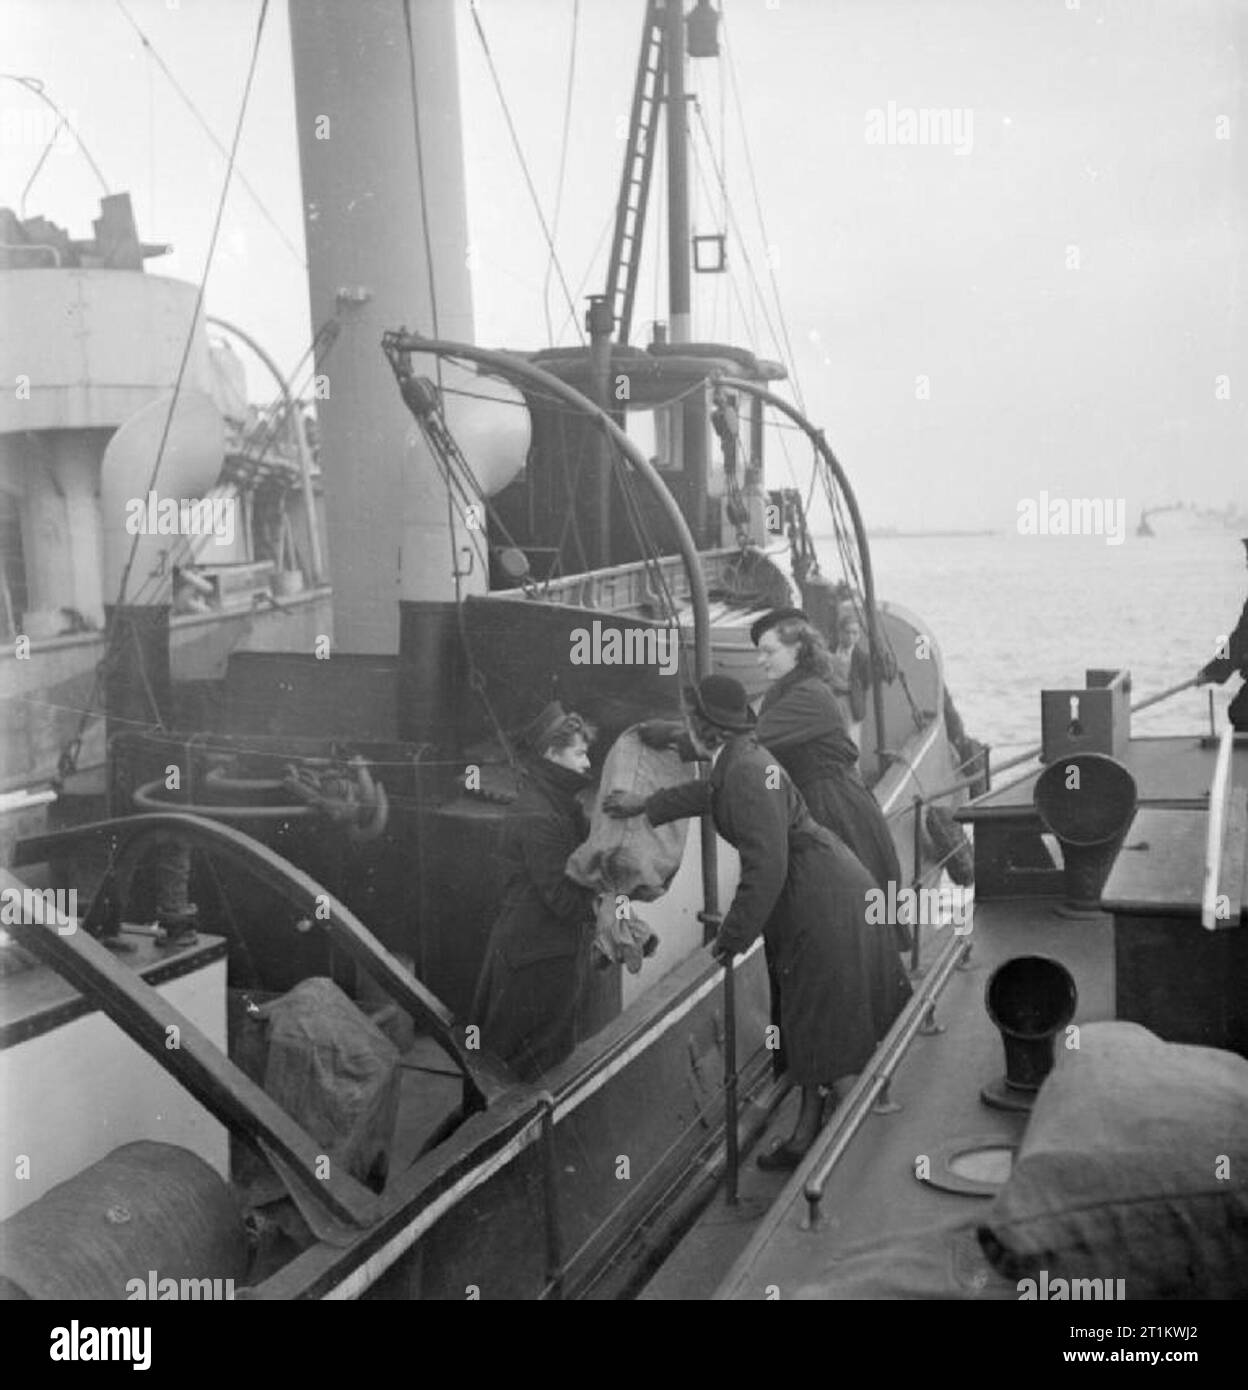 Women's Royal Naval Service- Wrens With the Fleet Mail, England, UK, November 1944 Two Wrens of the Fleet Mail deliver mail to a vessel moored in the harbour on a cold November day. They are passing a sack across to the vessel from the deck of the Mail Boat. Stock Photo